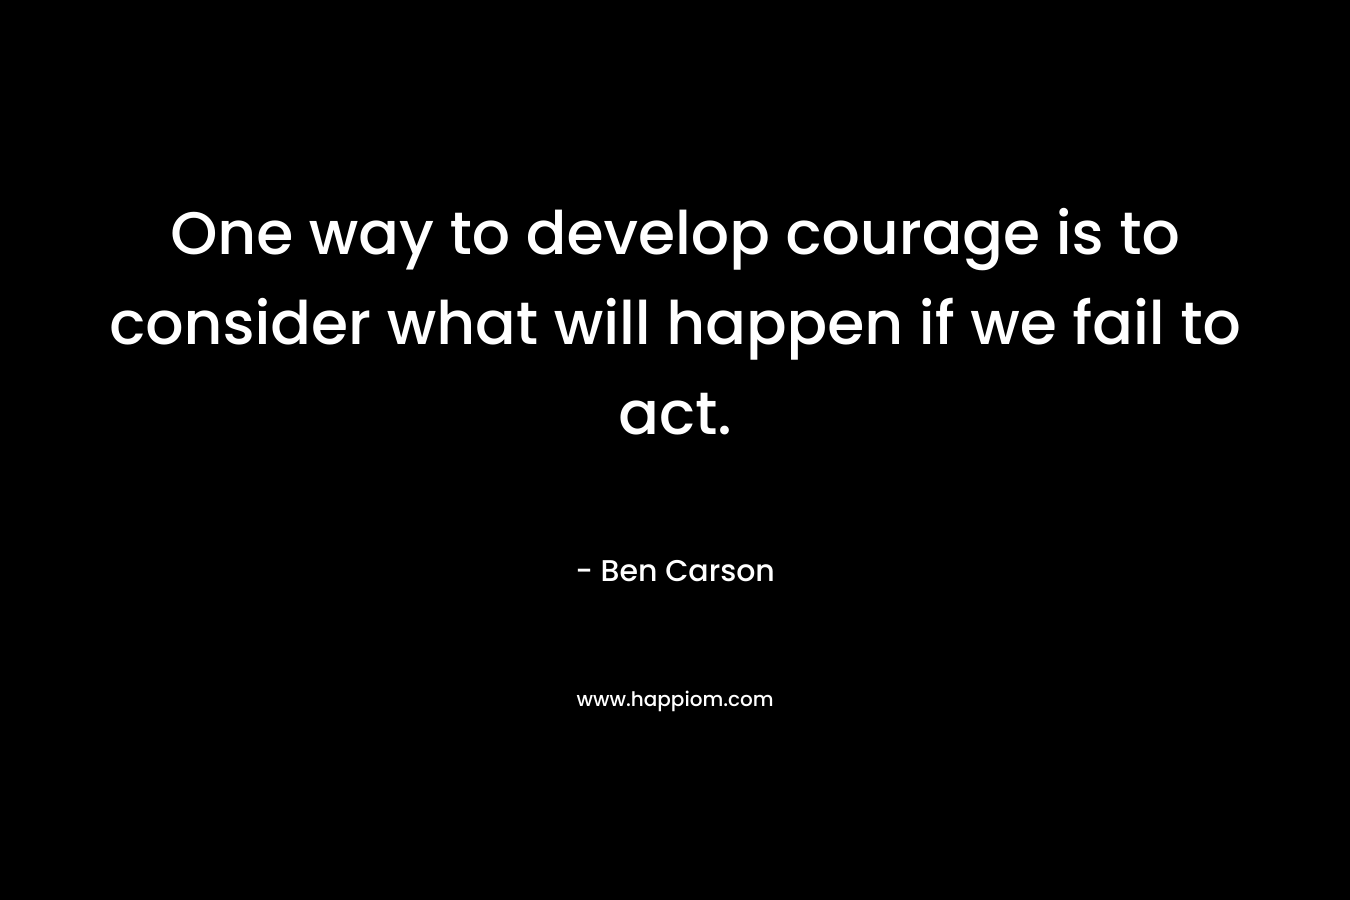 One way to develop courage is to consider what will happen if we fail to act.